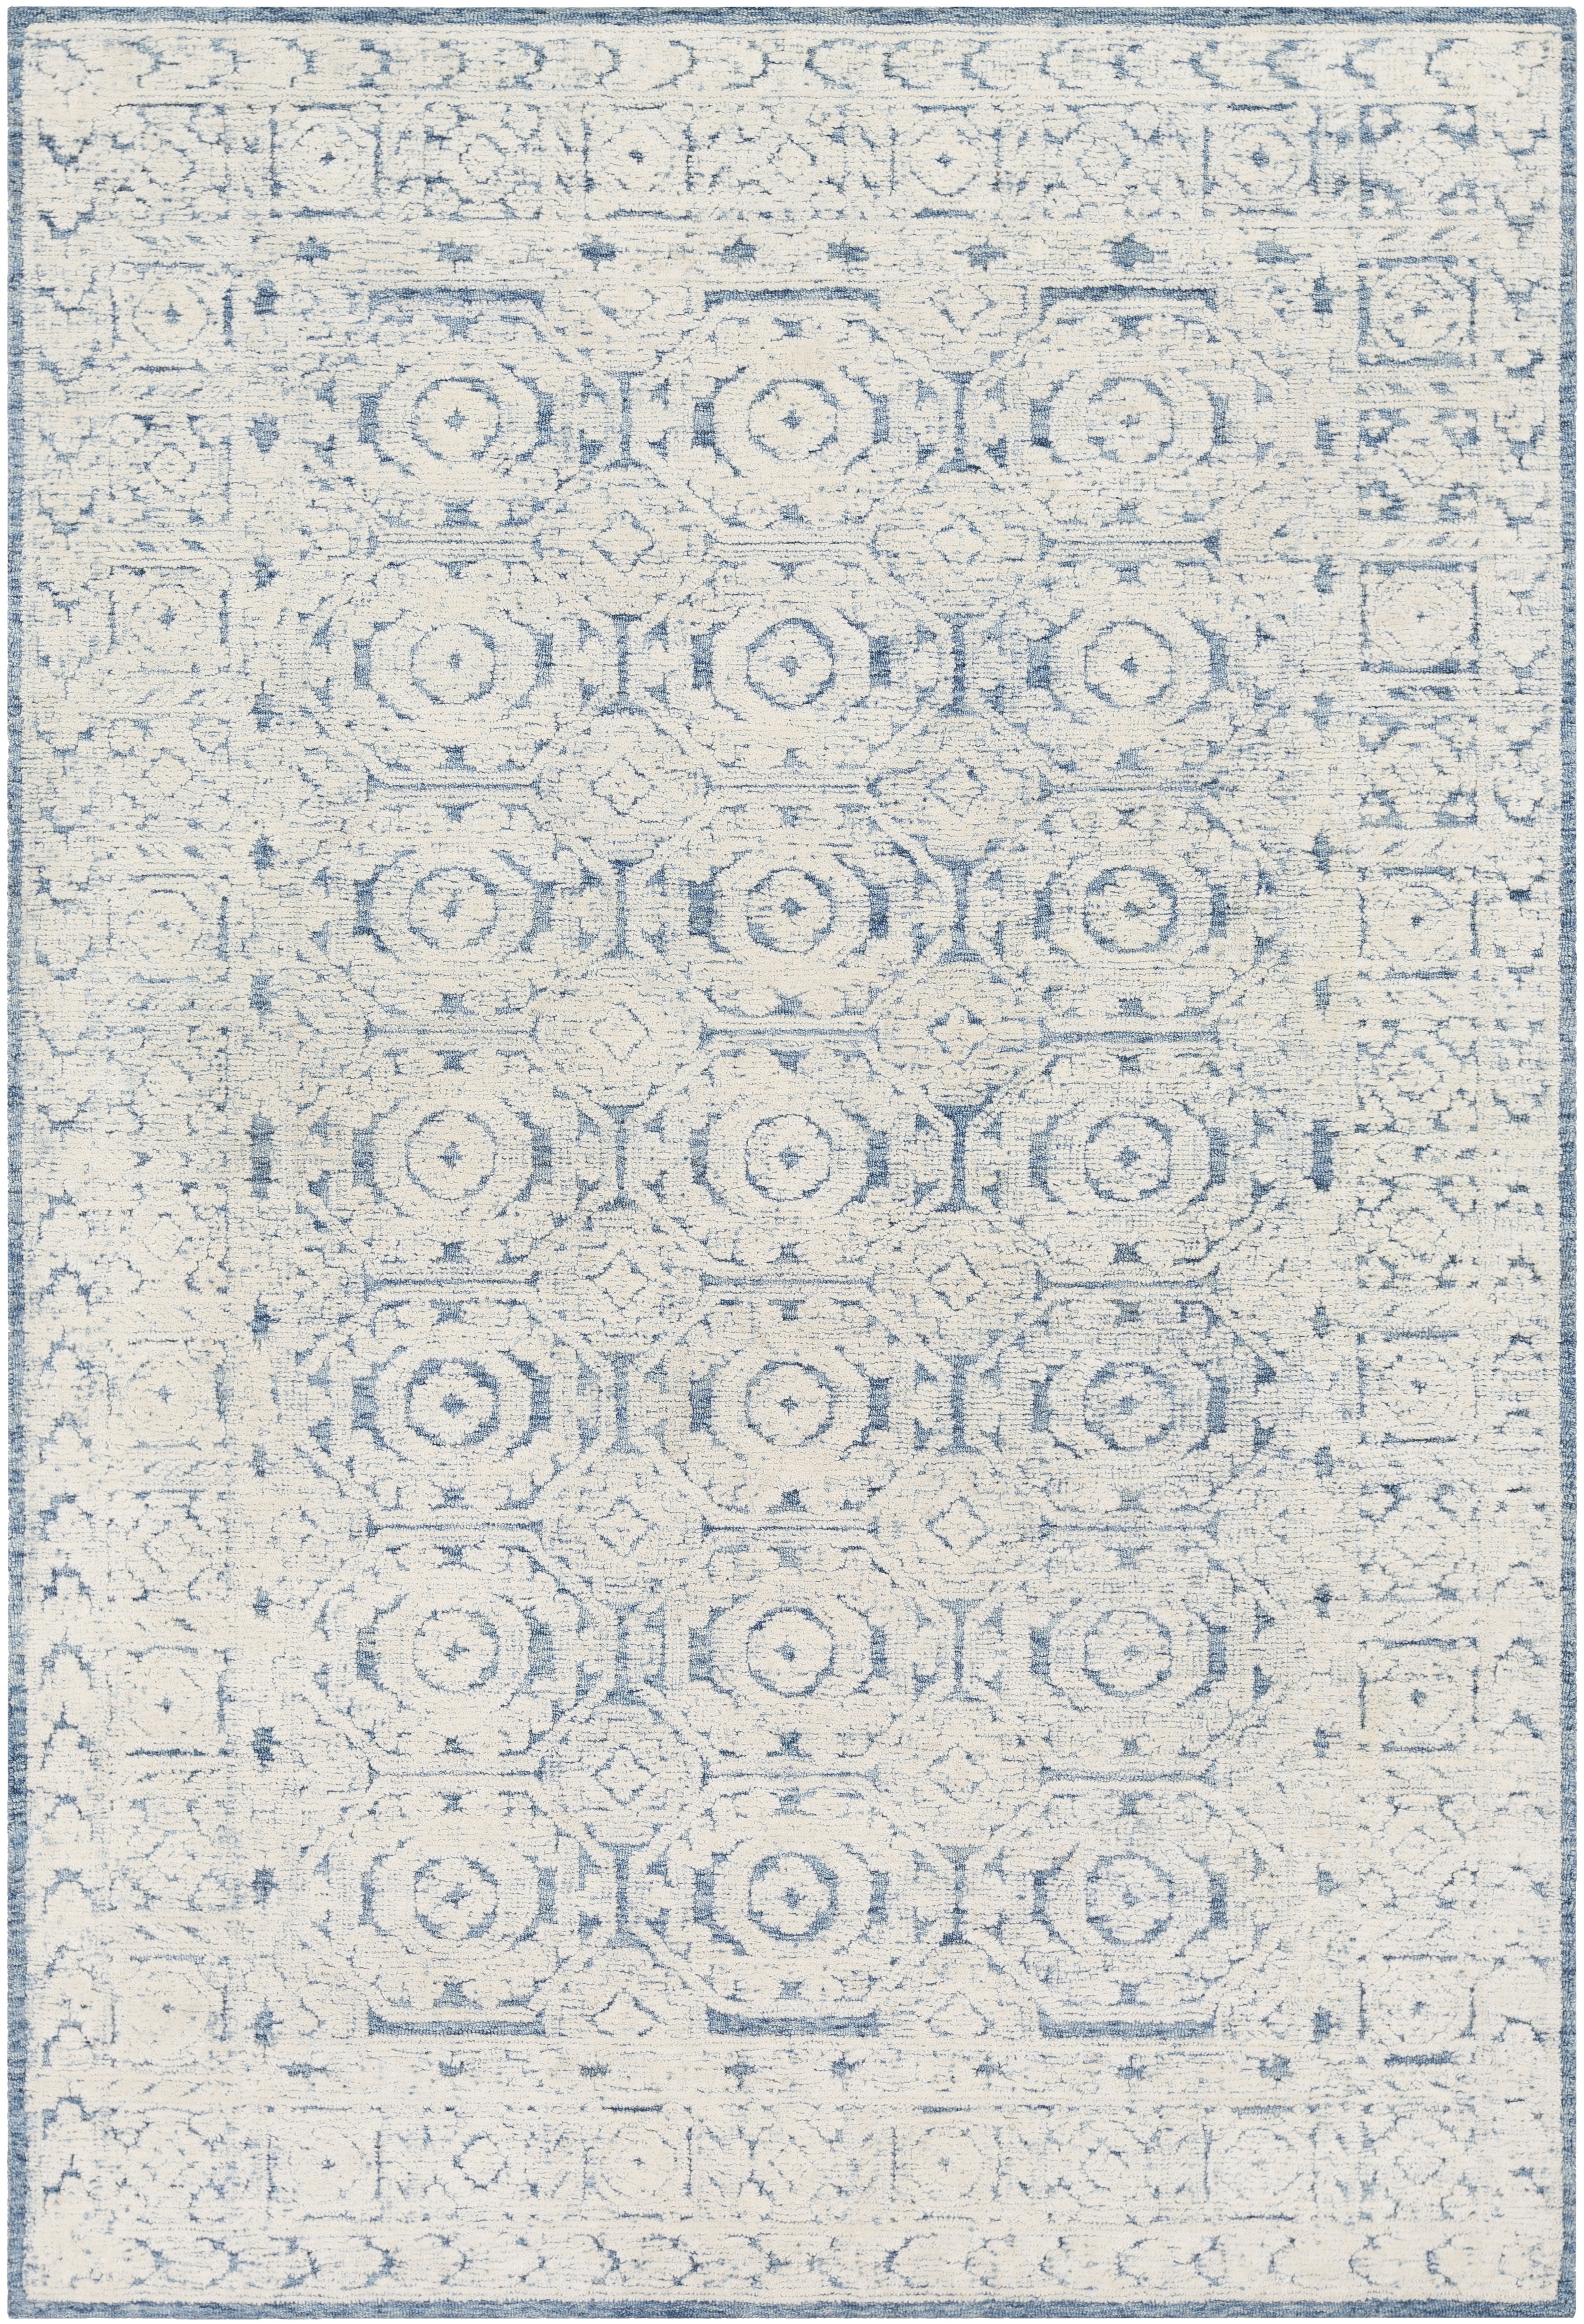 Louvre Rug, 9' x 12' - Image 0